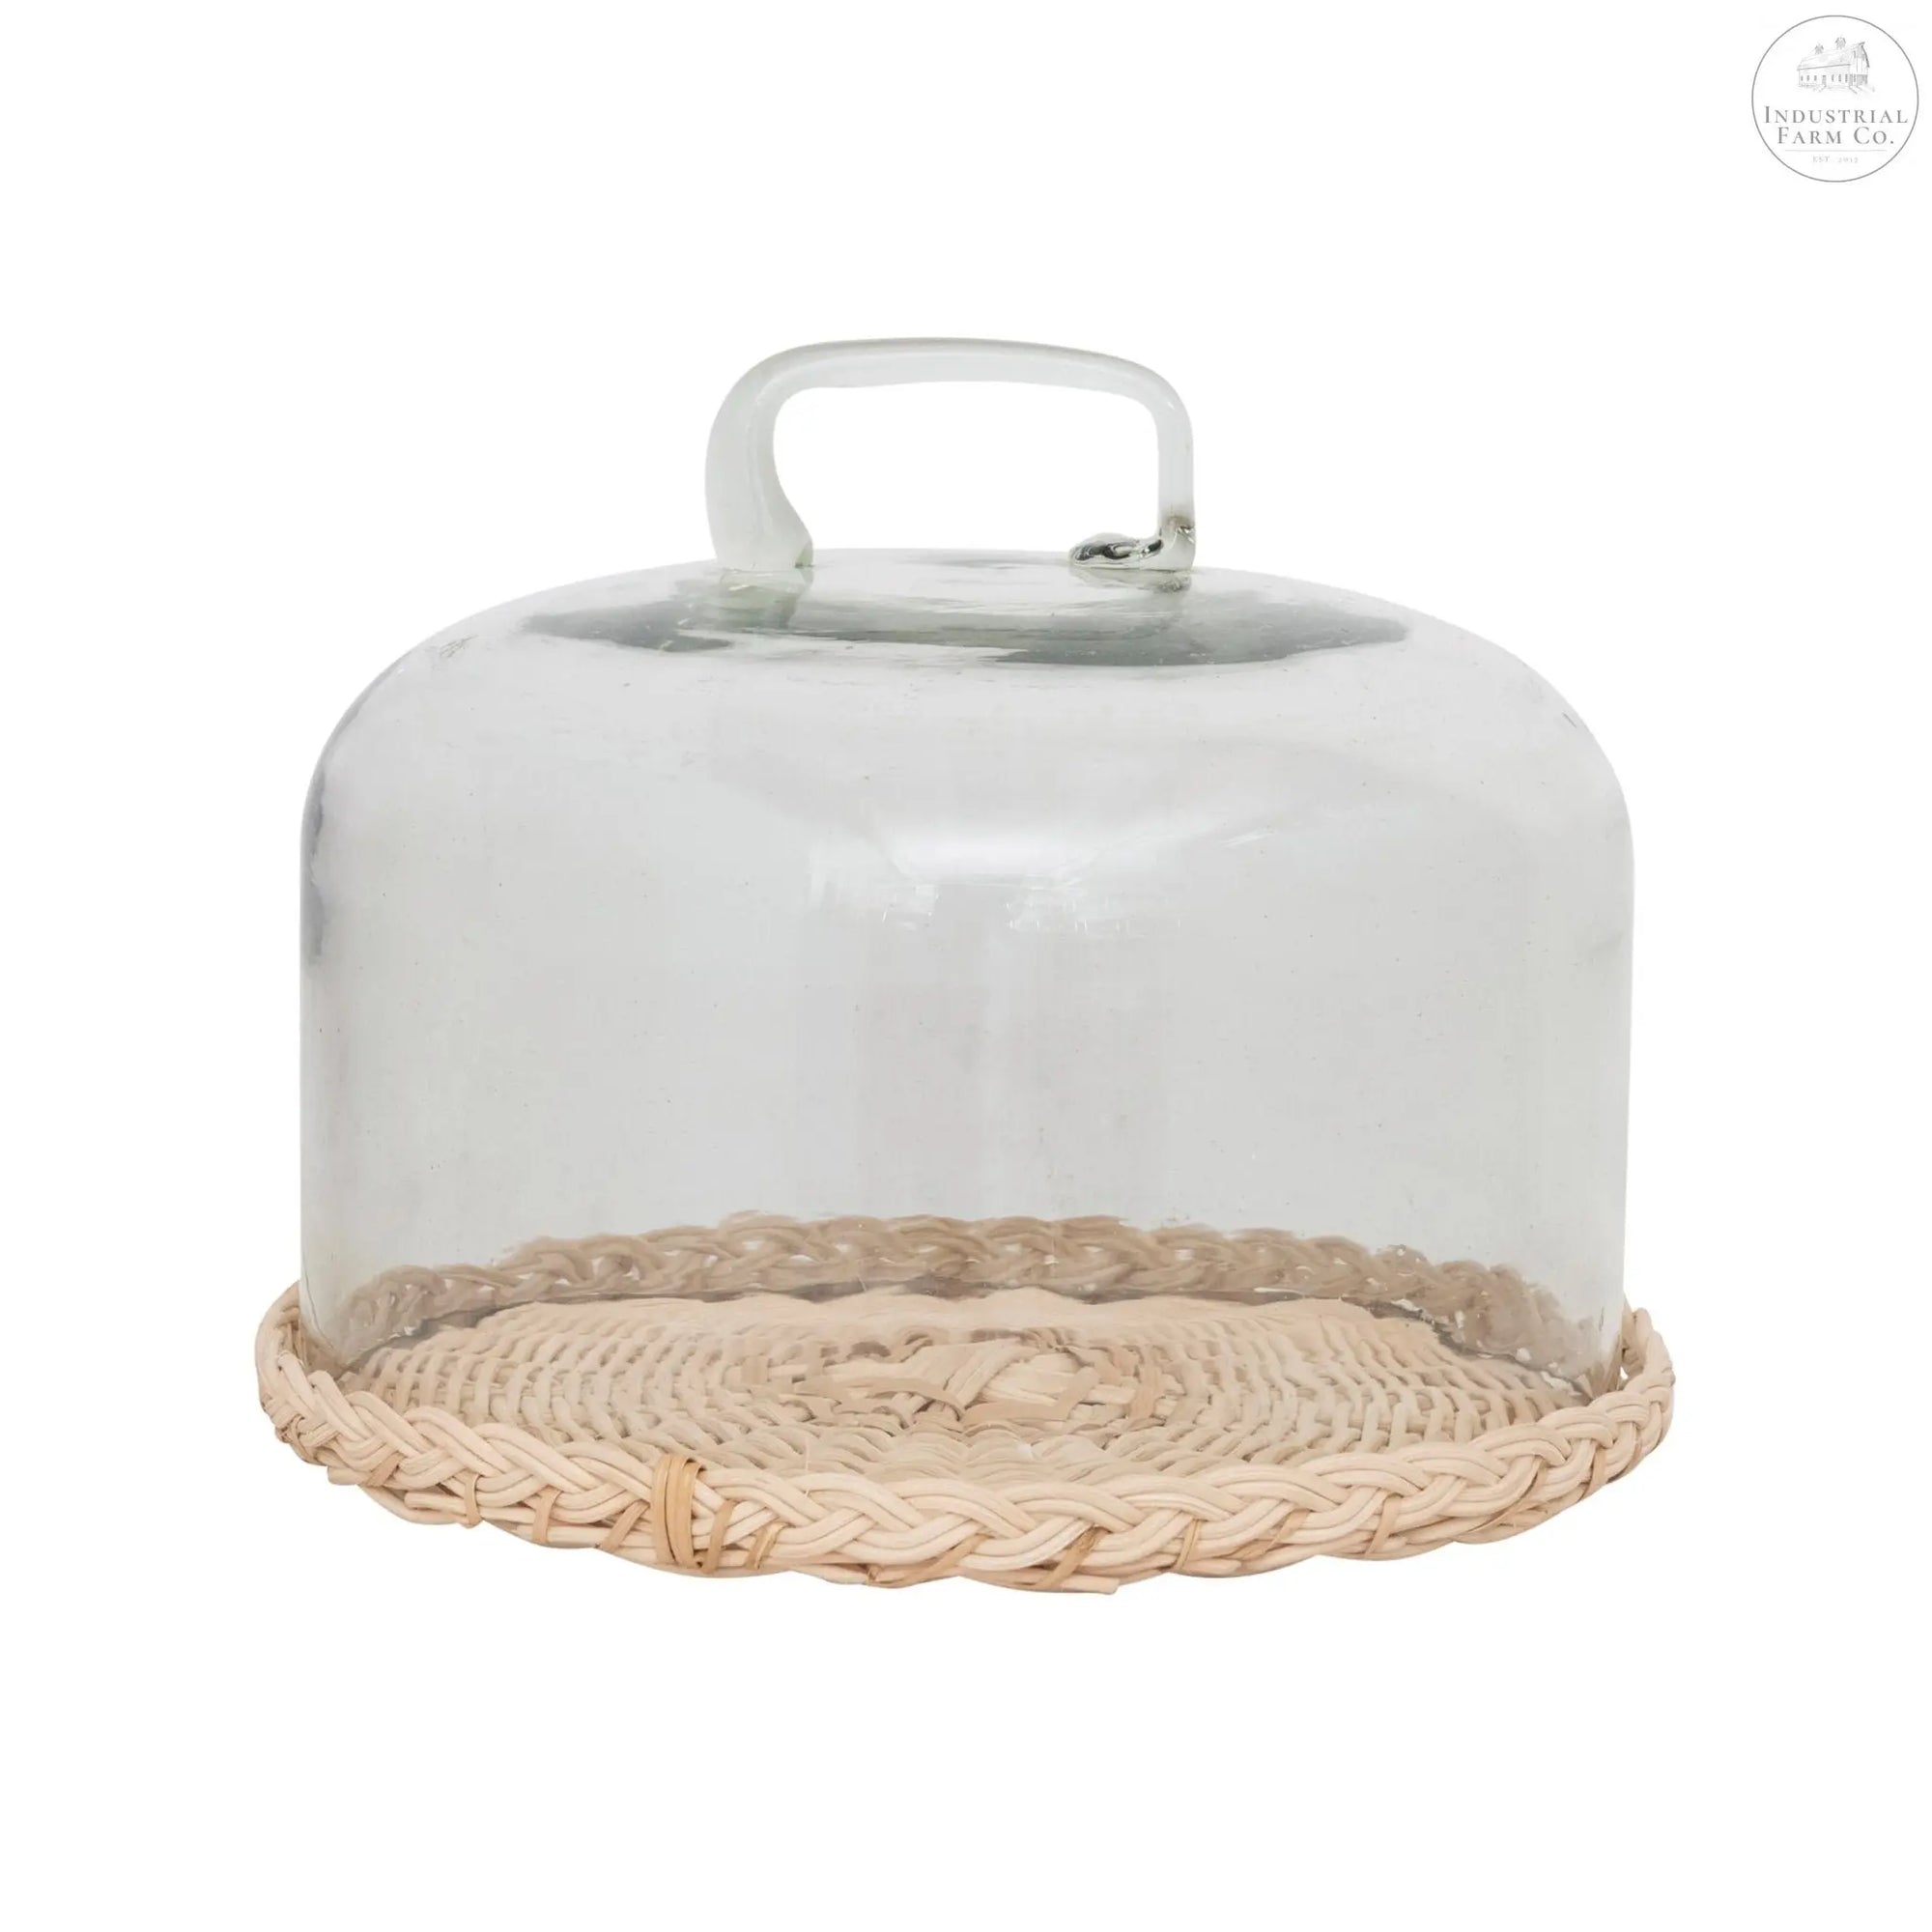 Show it Off Glass and Rattan Cloche     | Industrial Farm Co